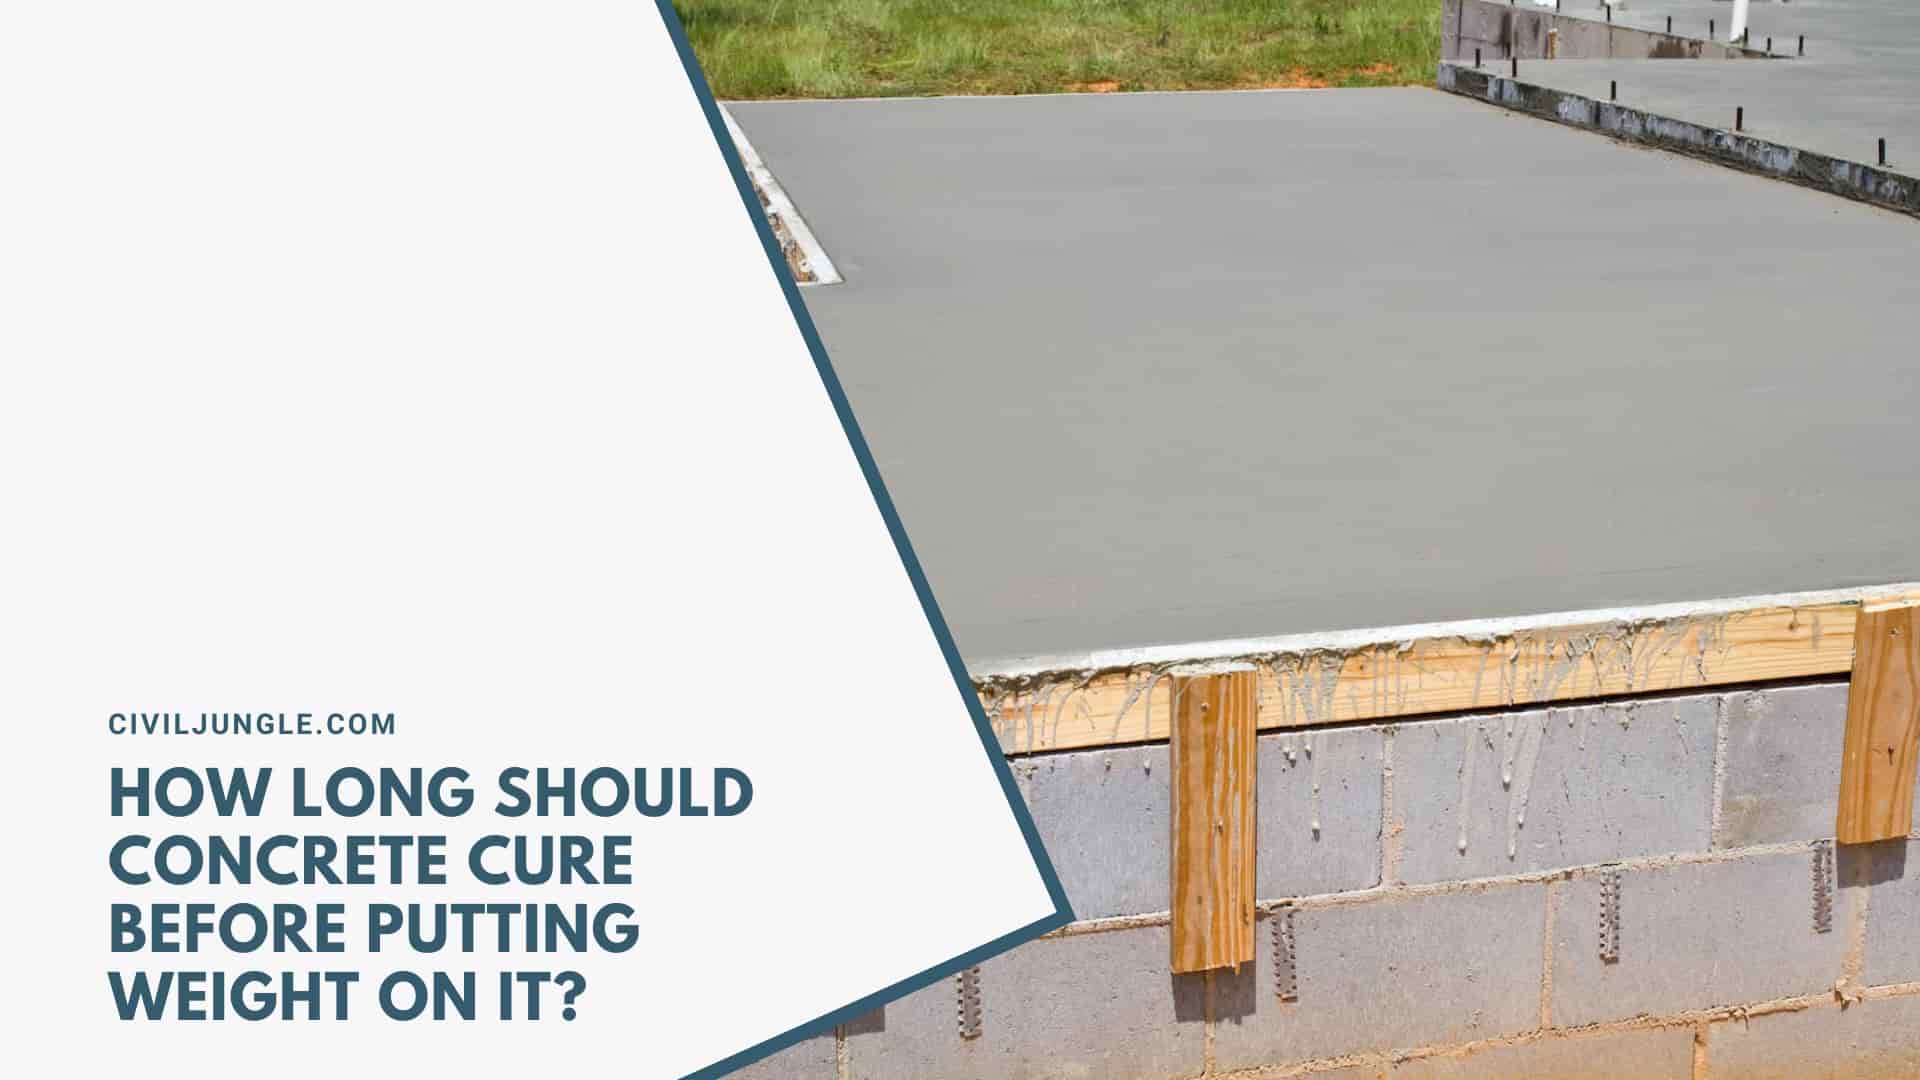 How Long Should Concrete Cure Before Putting Weight on It?